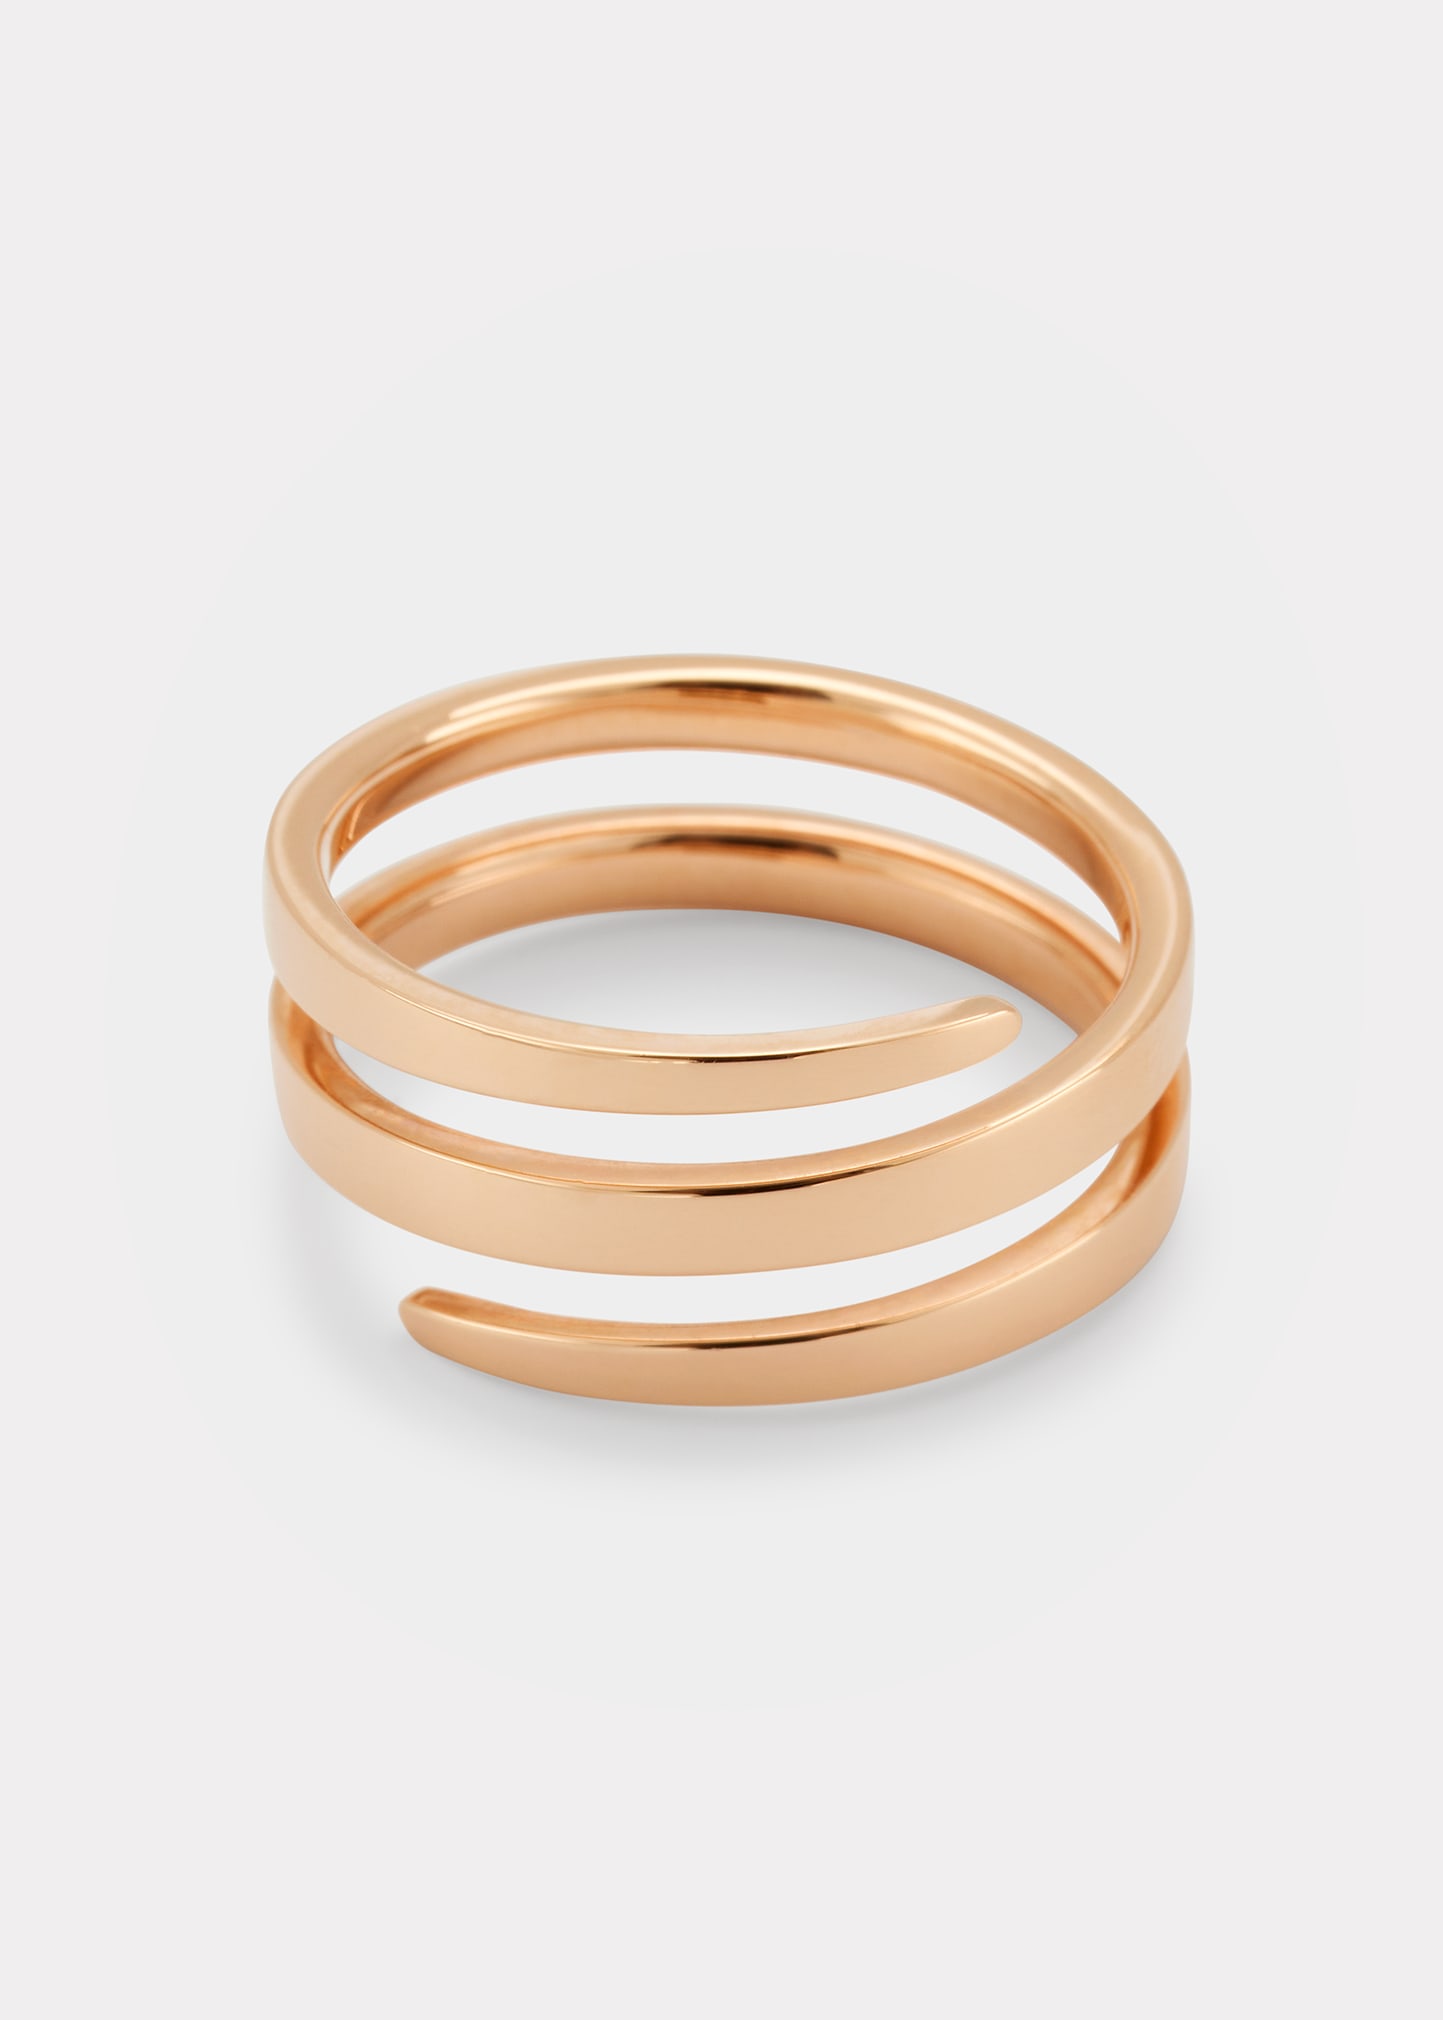 Coil Ring in 18k Rose Gold, Size 6